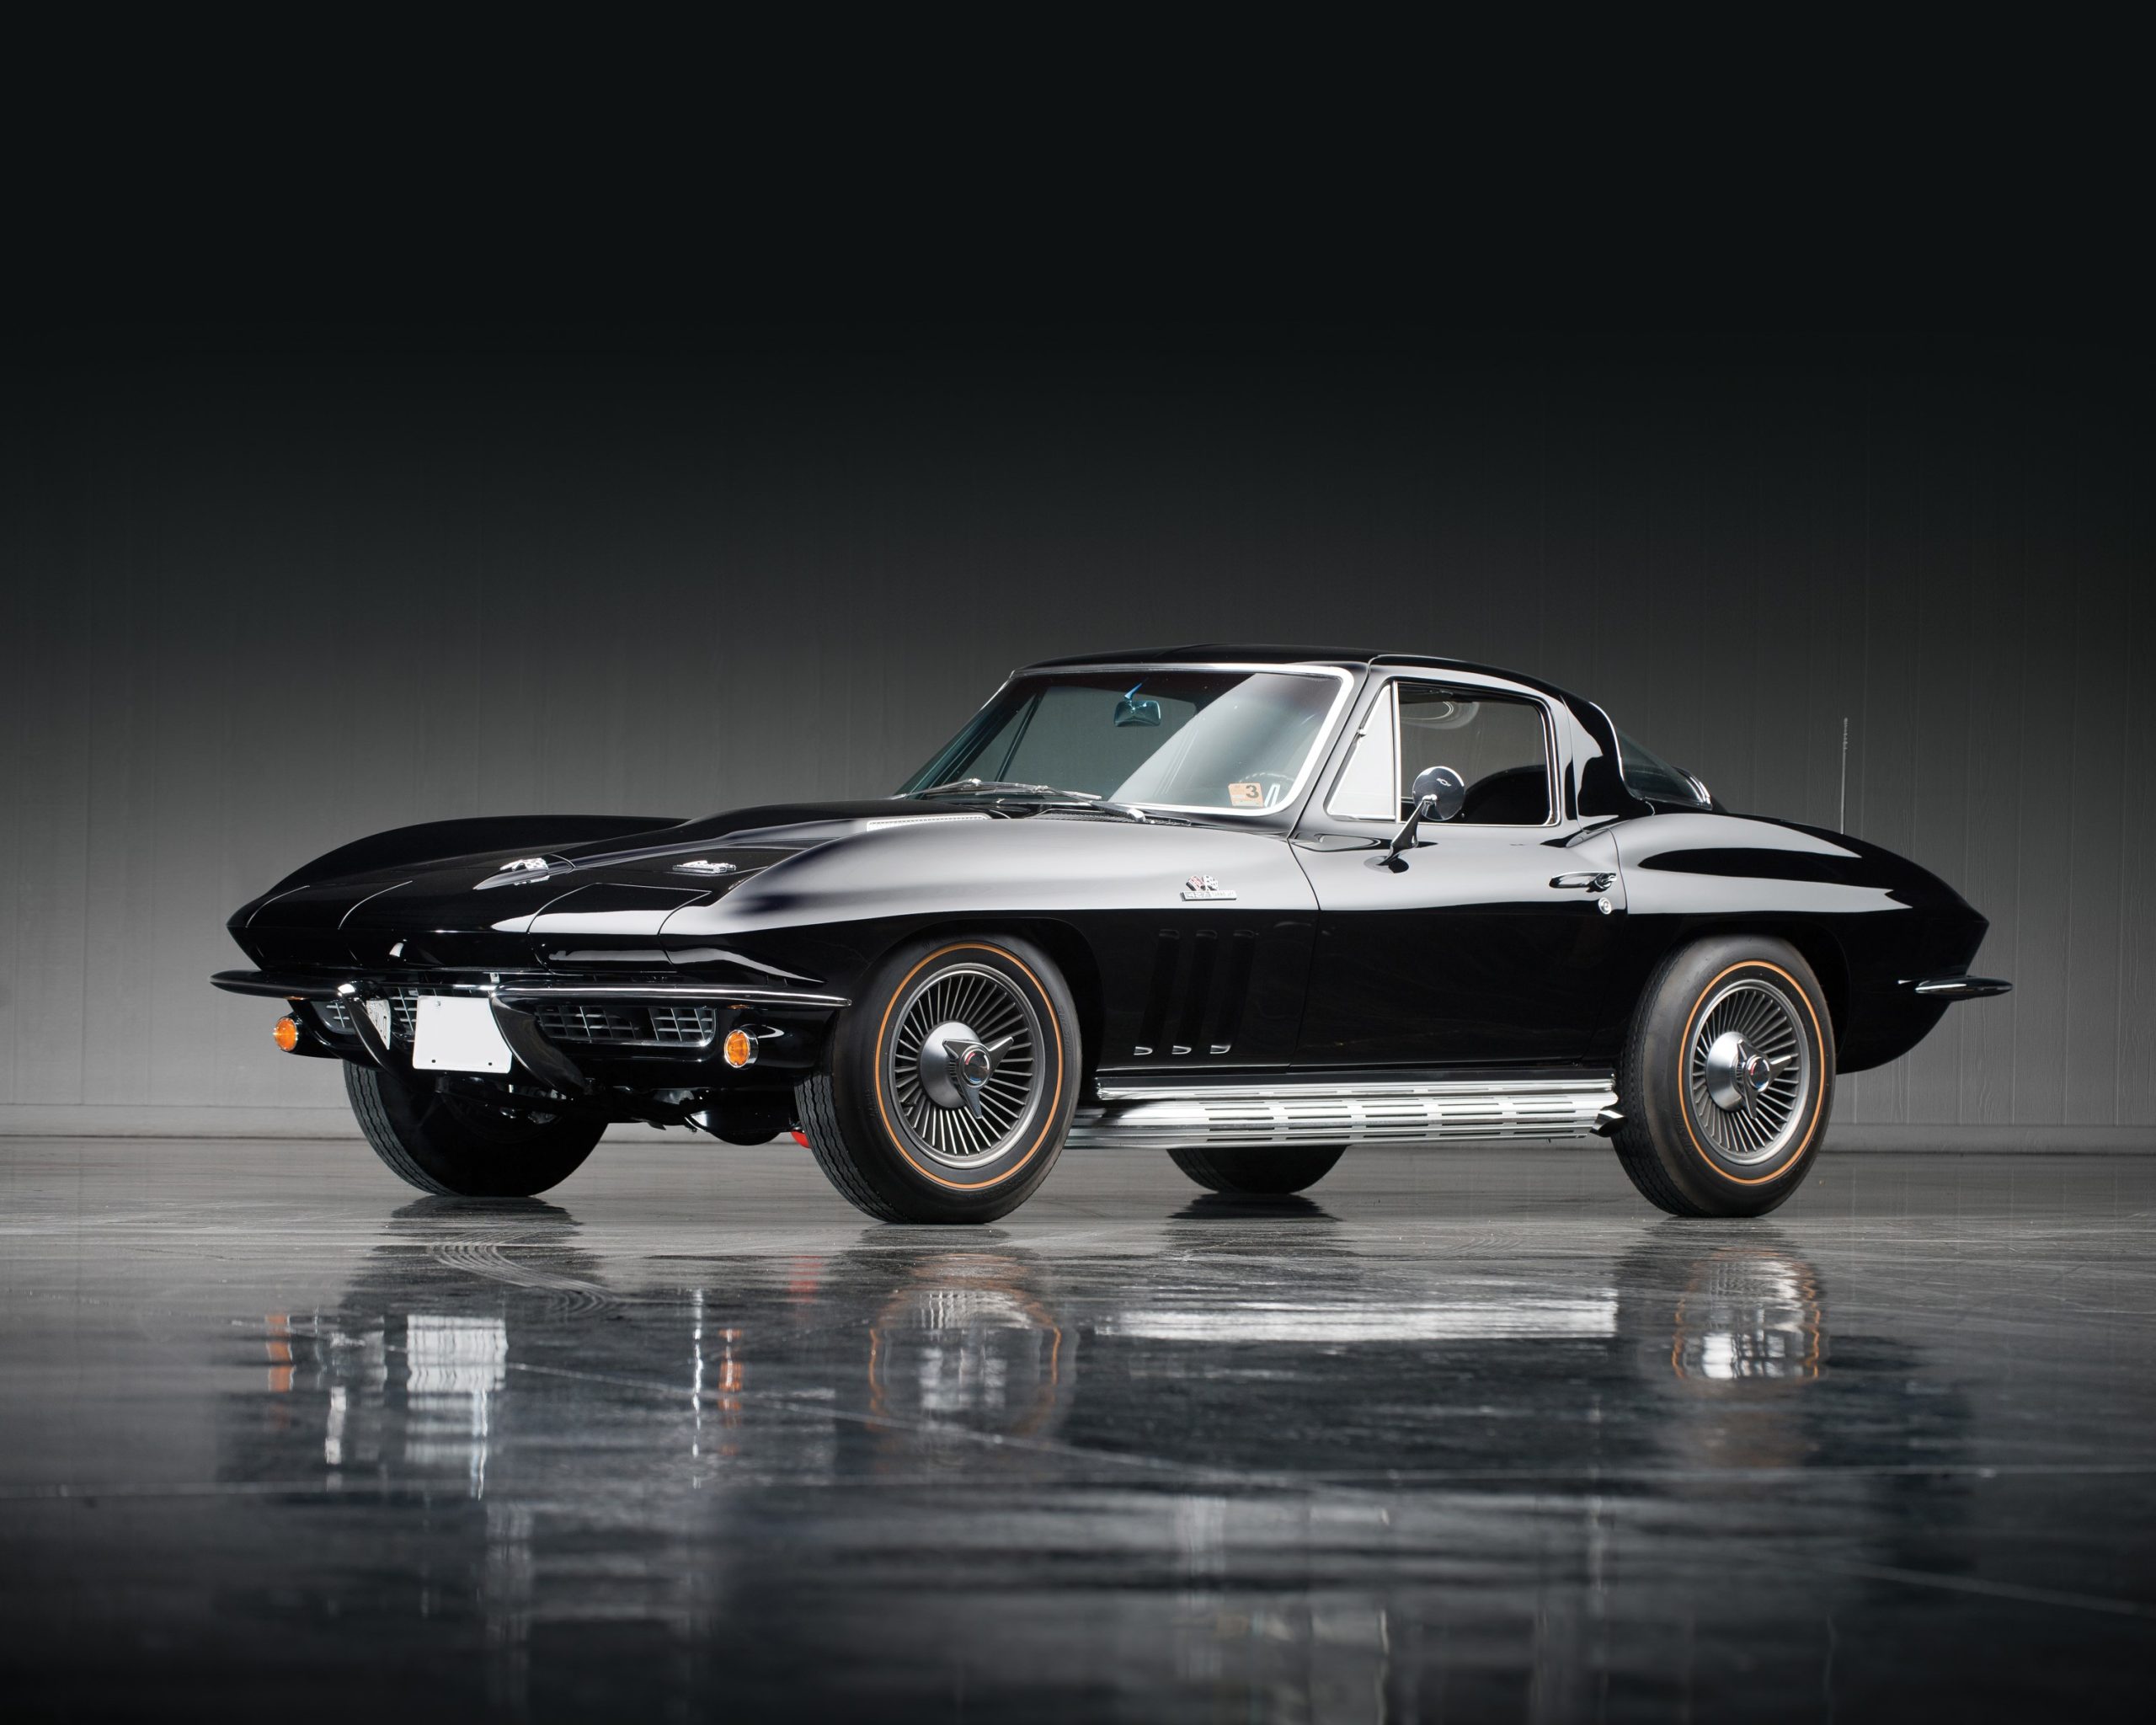 1966 Chevrolet Corvette Sting Ray 427/425 Coupe Darin Schnabel ©2013 Courtesy of RM Auctions